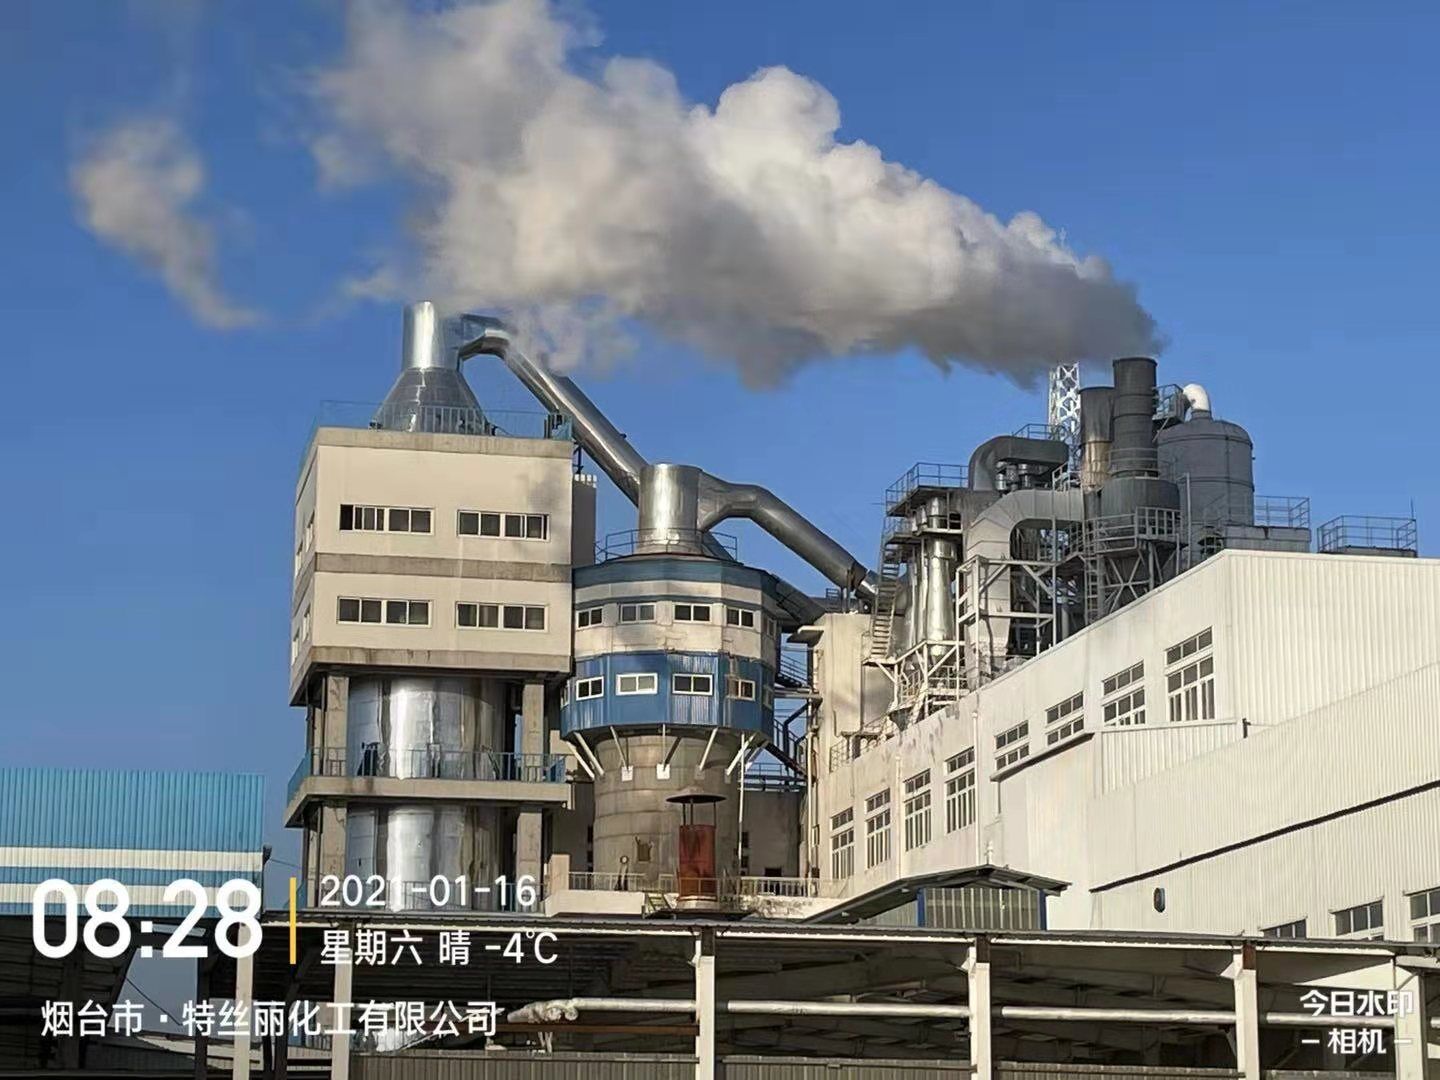 Spray tower detergent powder with annual output of 150,000 tons was put into operation